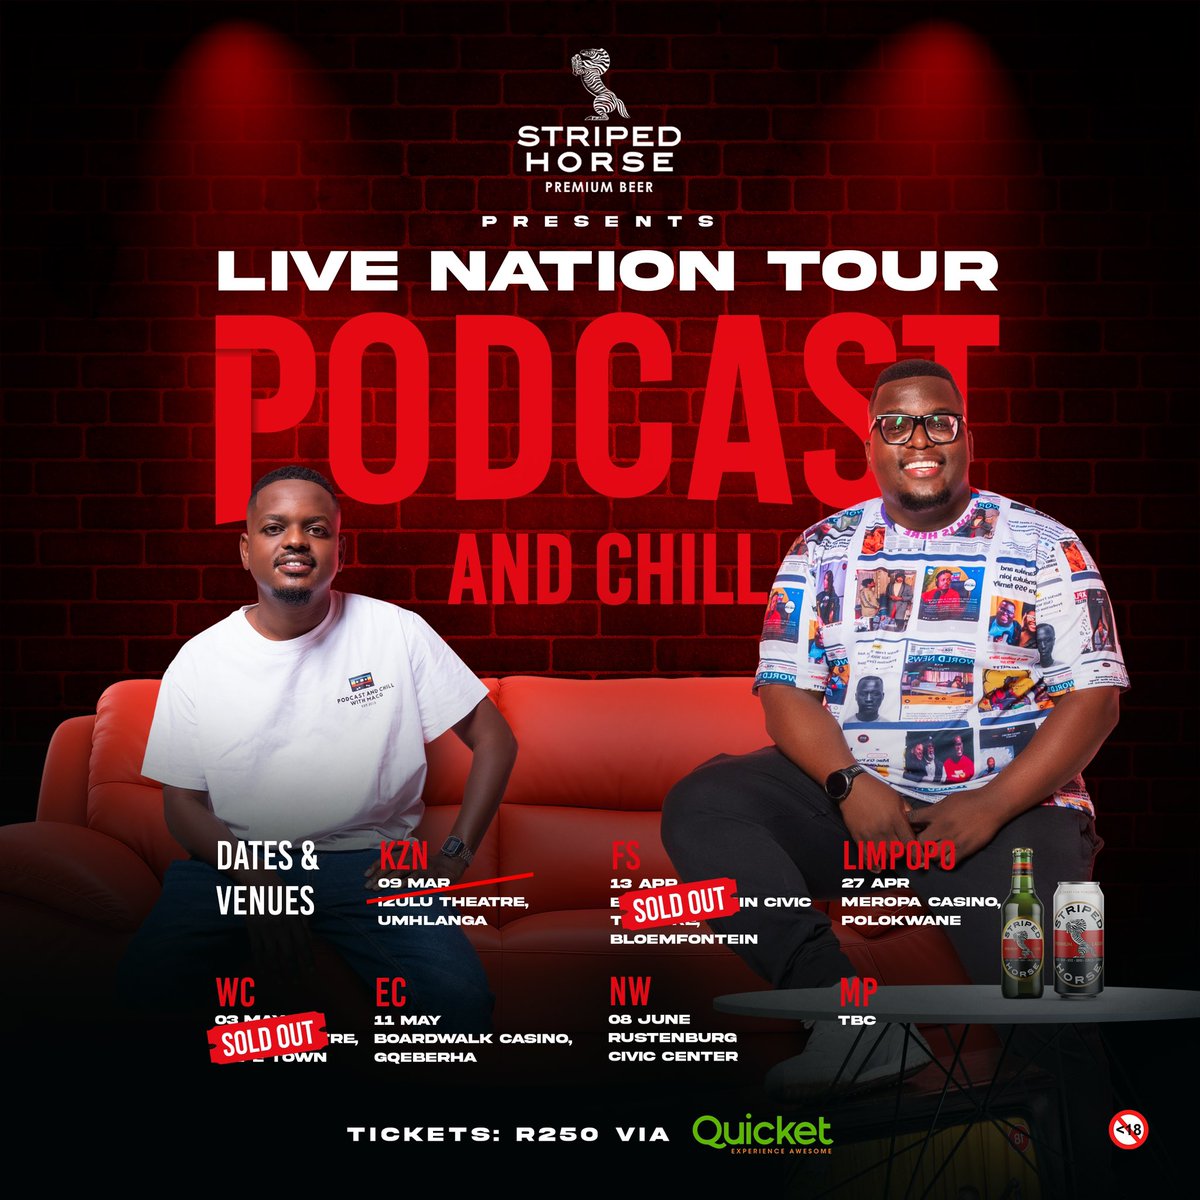 Hee Ndaa ‼️ We are on the ROAD ✈️ Don’t miss out on the opportunity of getting the #podcastandchill experience🚀 as we make our way to your HOMETOWN ✈️ Secure your spot by going to Quicket or click the link below 🎫 quicket.co.za/organisers/645… Note: All members and Patreons can